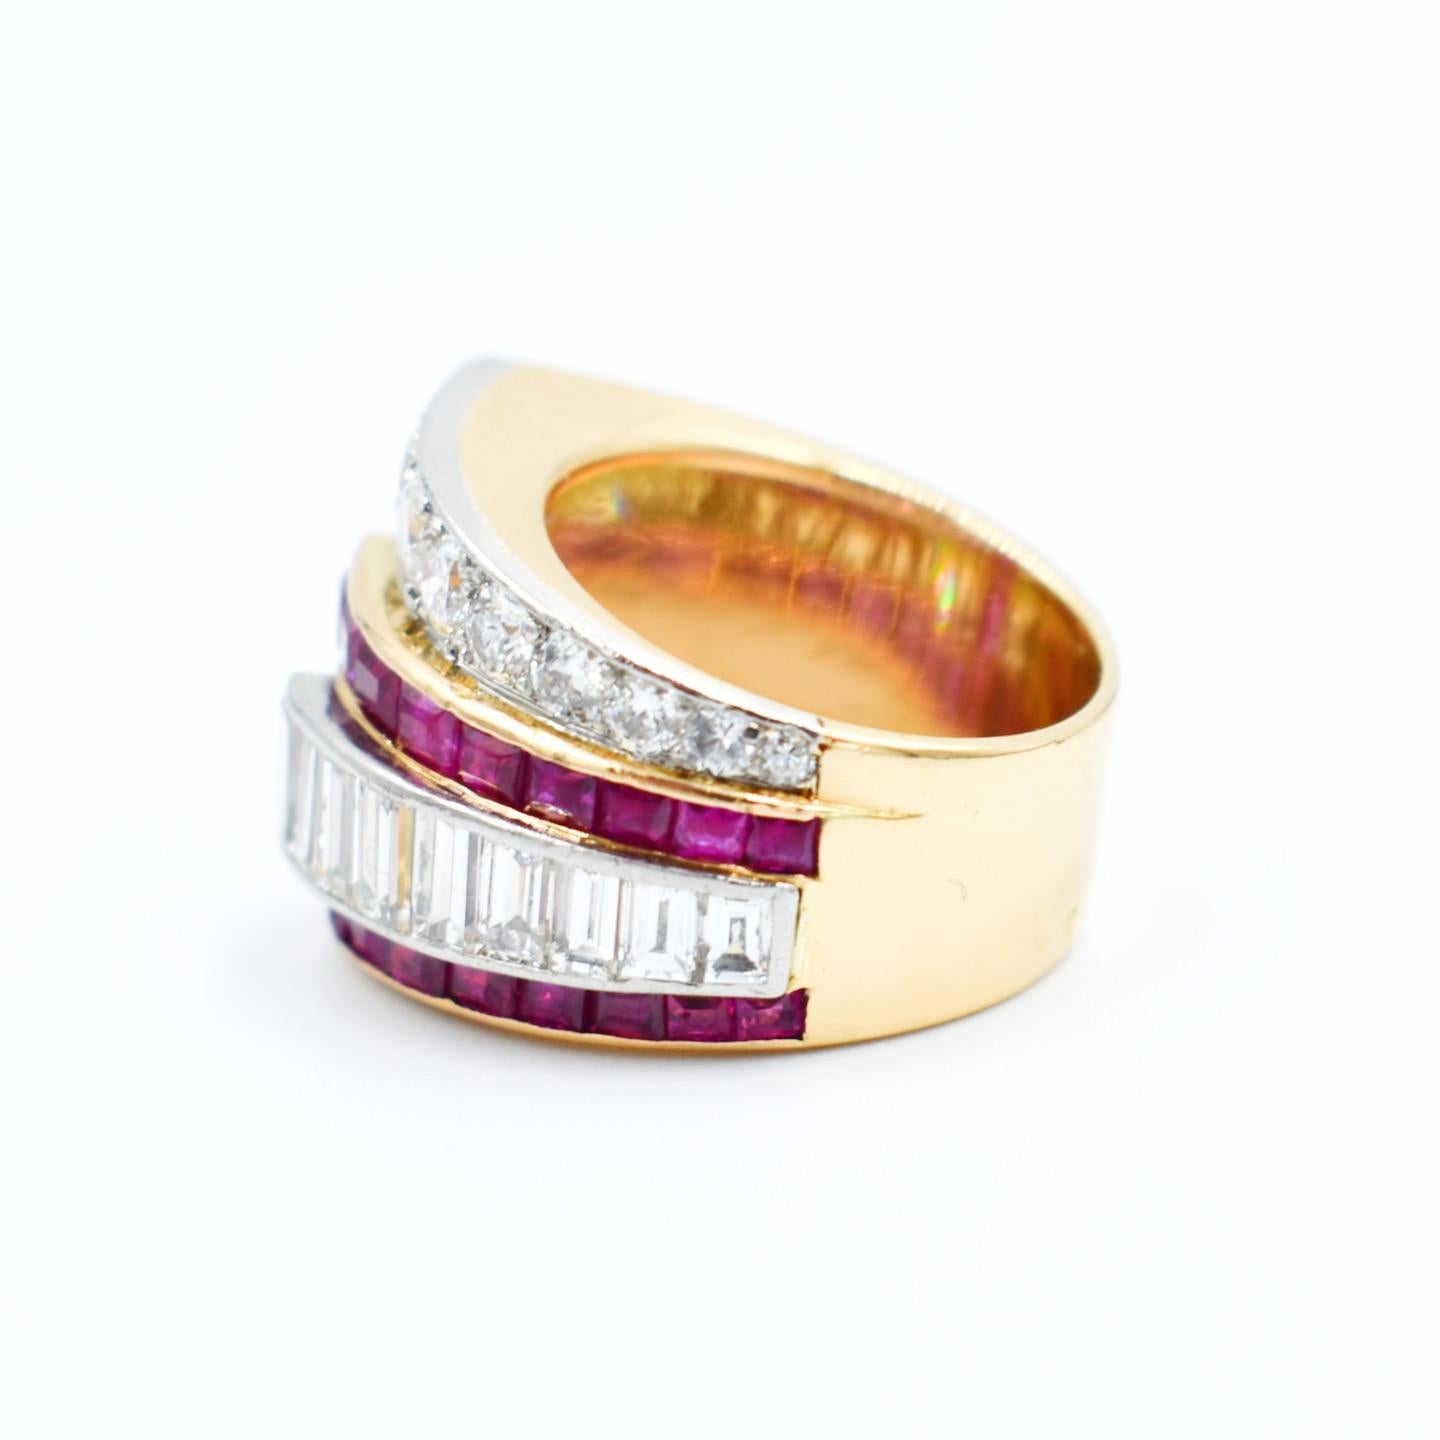 This is an authentic Tank ring from the 1930s, crafted in 18-carat gold and platinum, adorned with diamonds and rubies.
This magnificent ring stands out due to the presence of two diamond cuts: 9 baguette-cut diamonds and 11 round-cut diamonds,